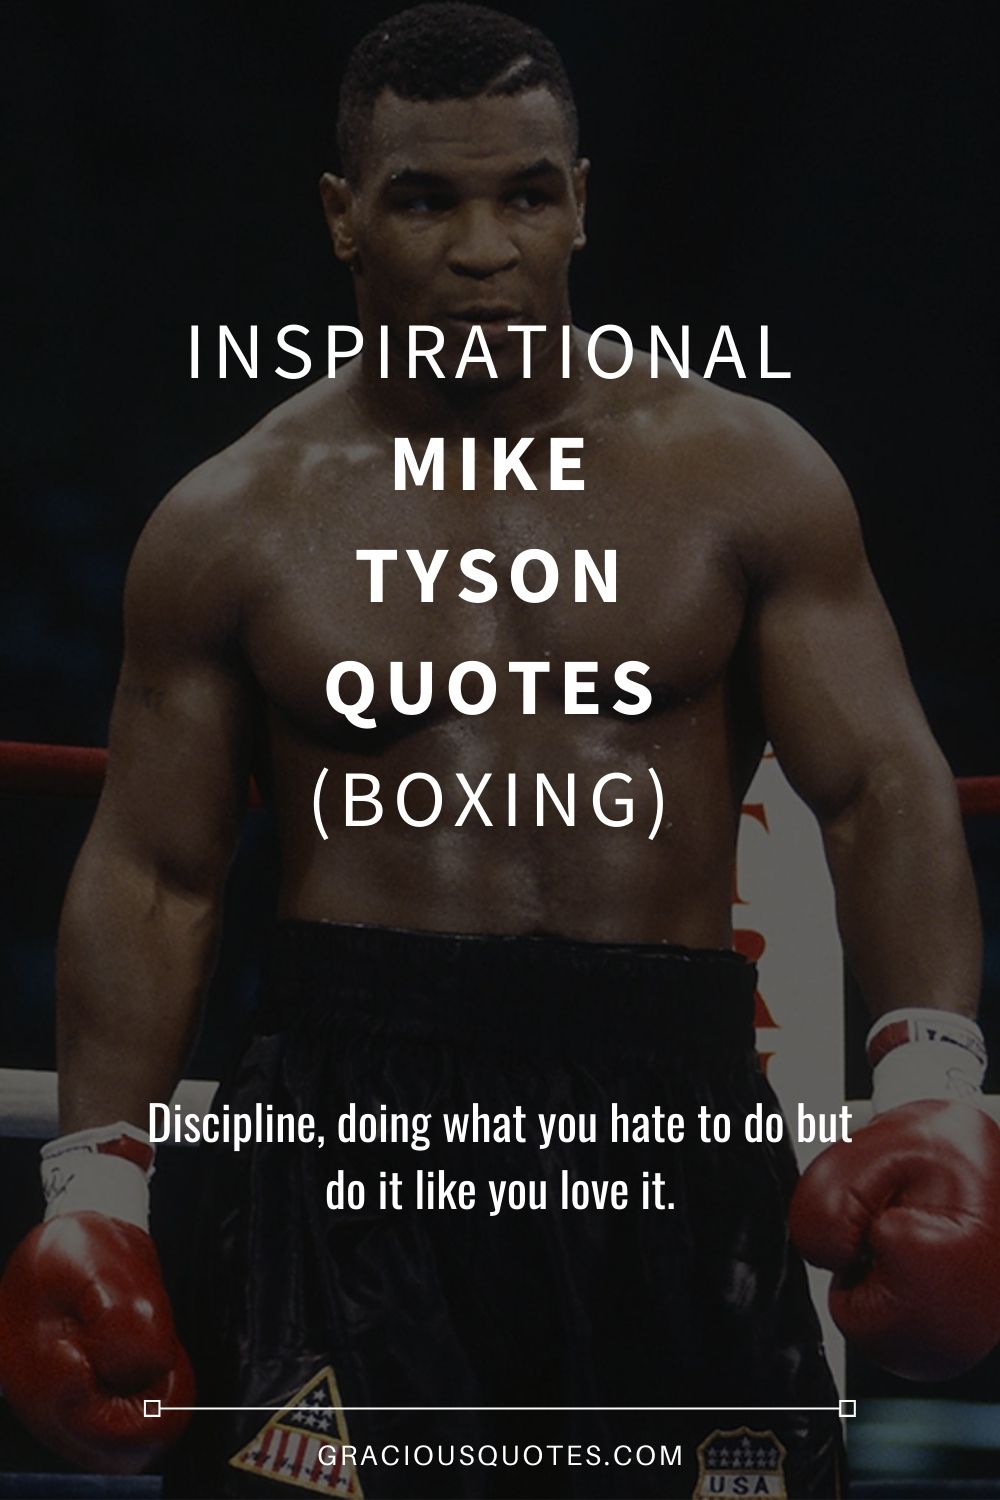 Inspirational Mike Tyson Quotes (BOXING) - Gracious Quotes